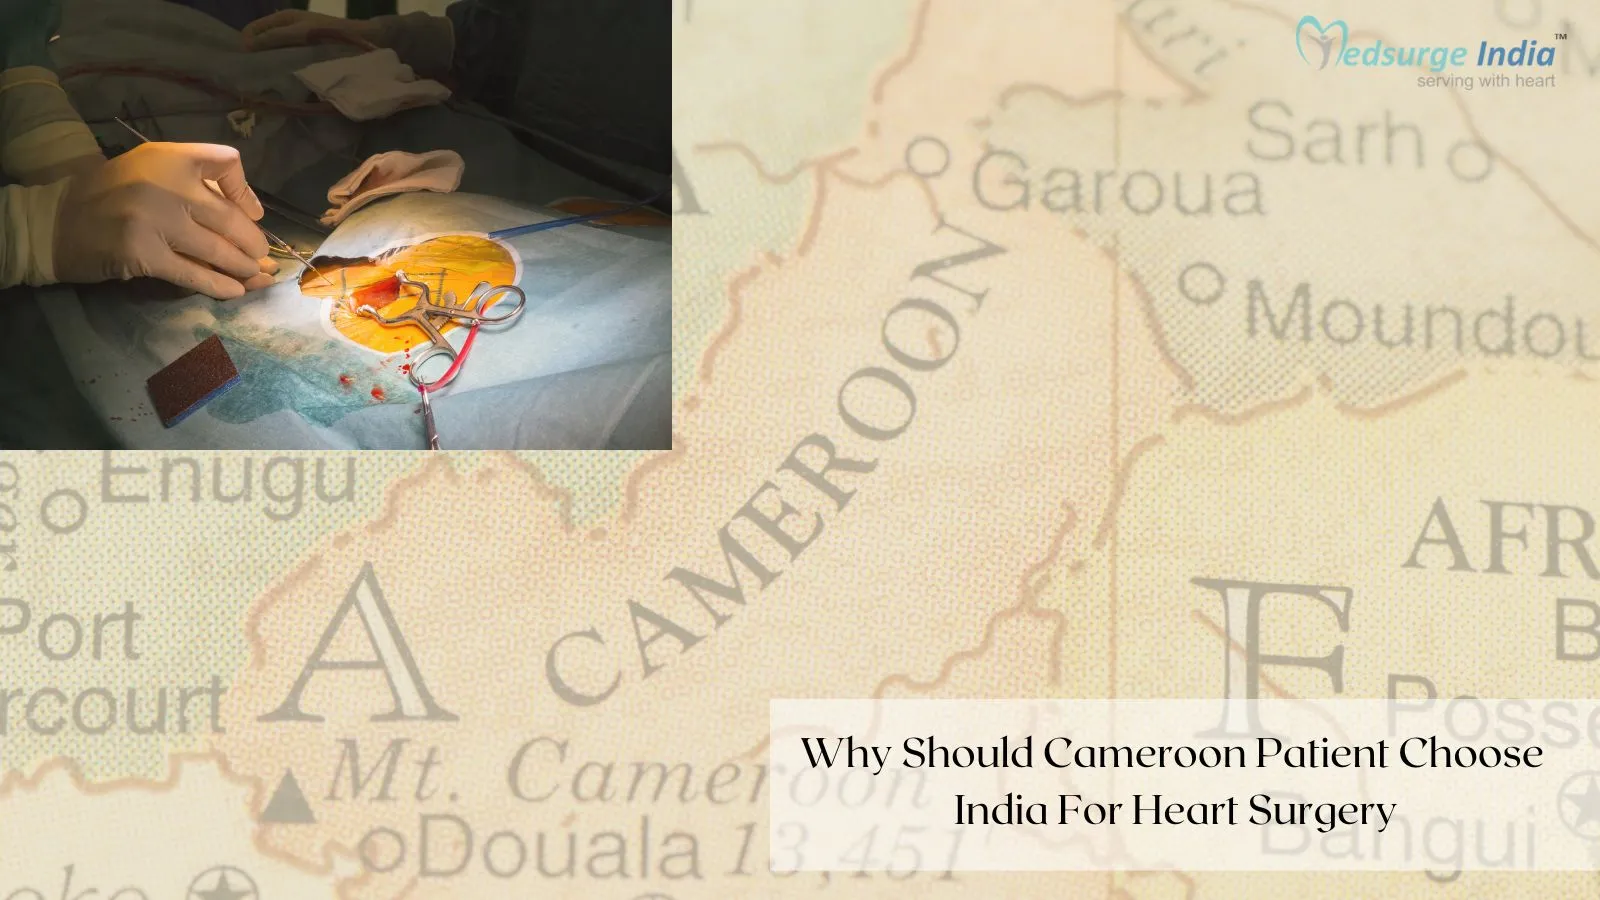 Why Should Cameroon Patient Choose India For Heart Surgery